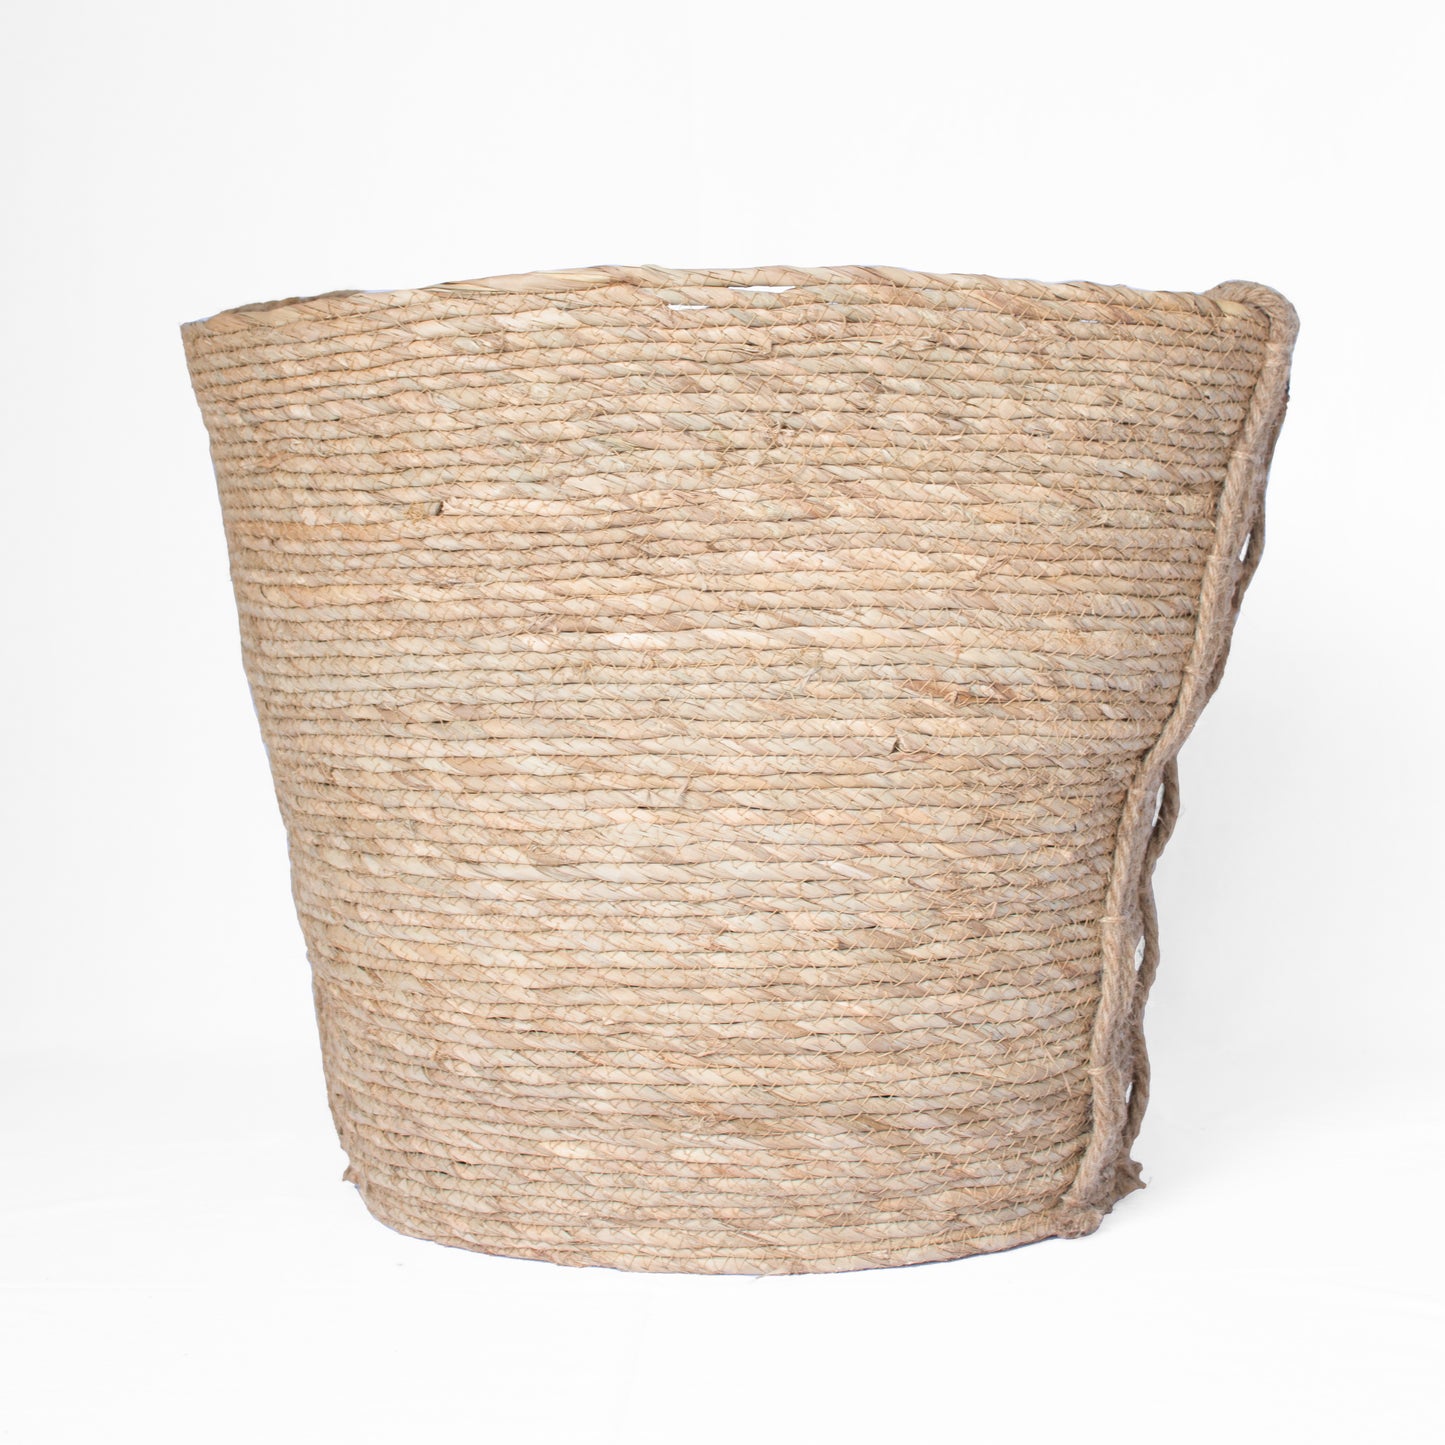 Oval Natural Grass Woven Basket with Grass Handle